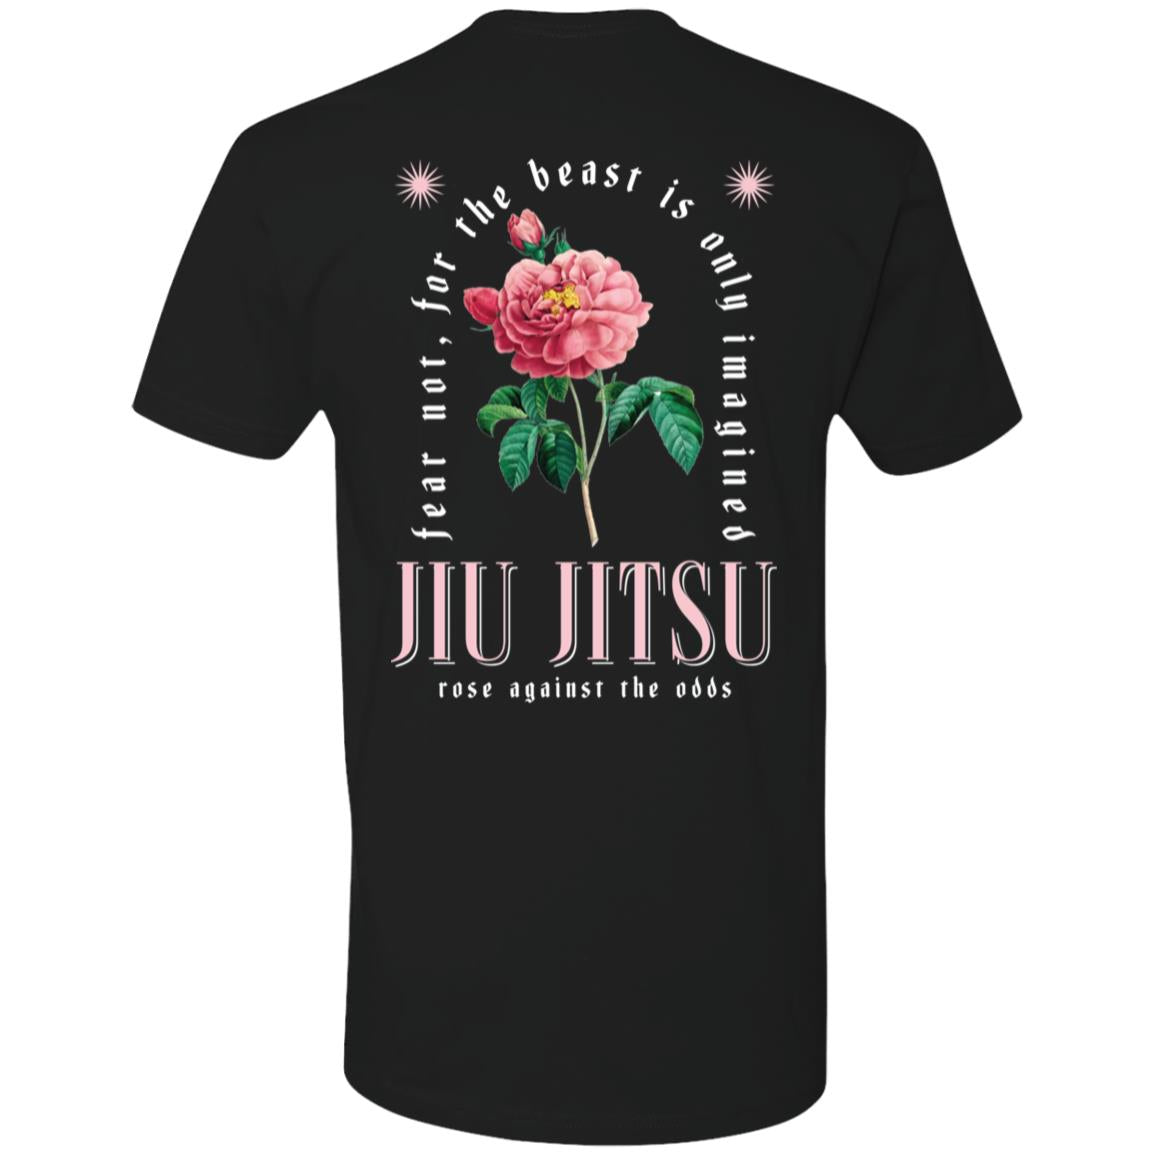 The Beast Is Only Imagined - Black jiu-jitsu themed t-shirt with floral design and "conquer your imagined fear" motivational quote.